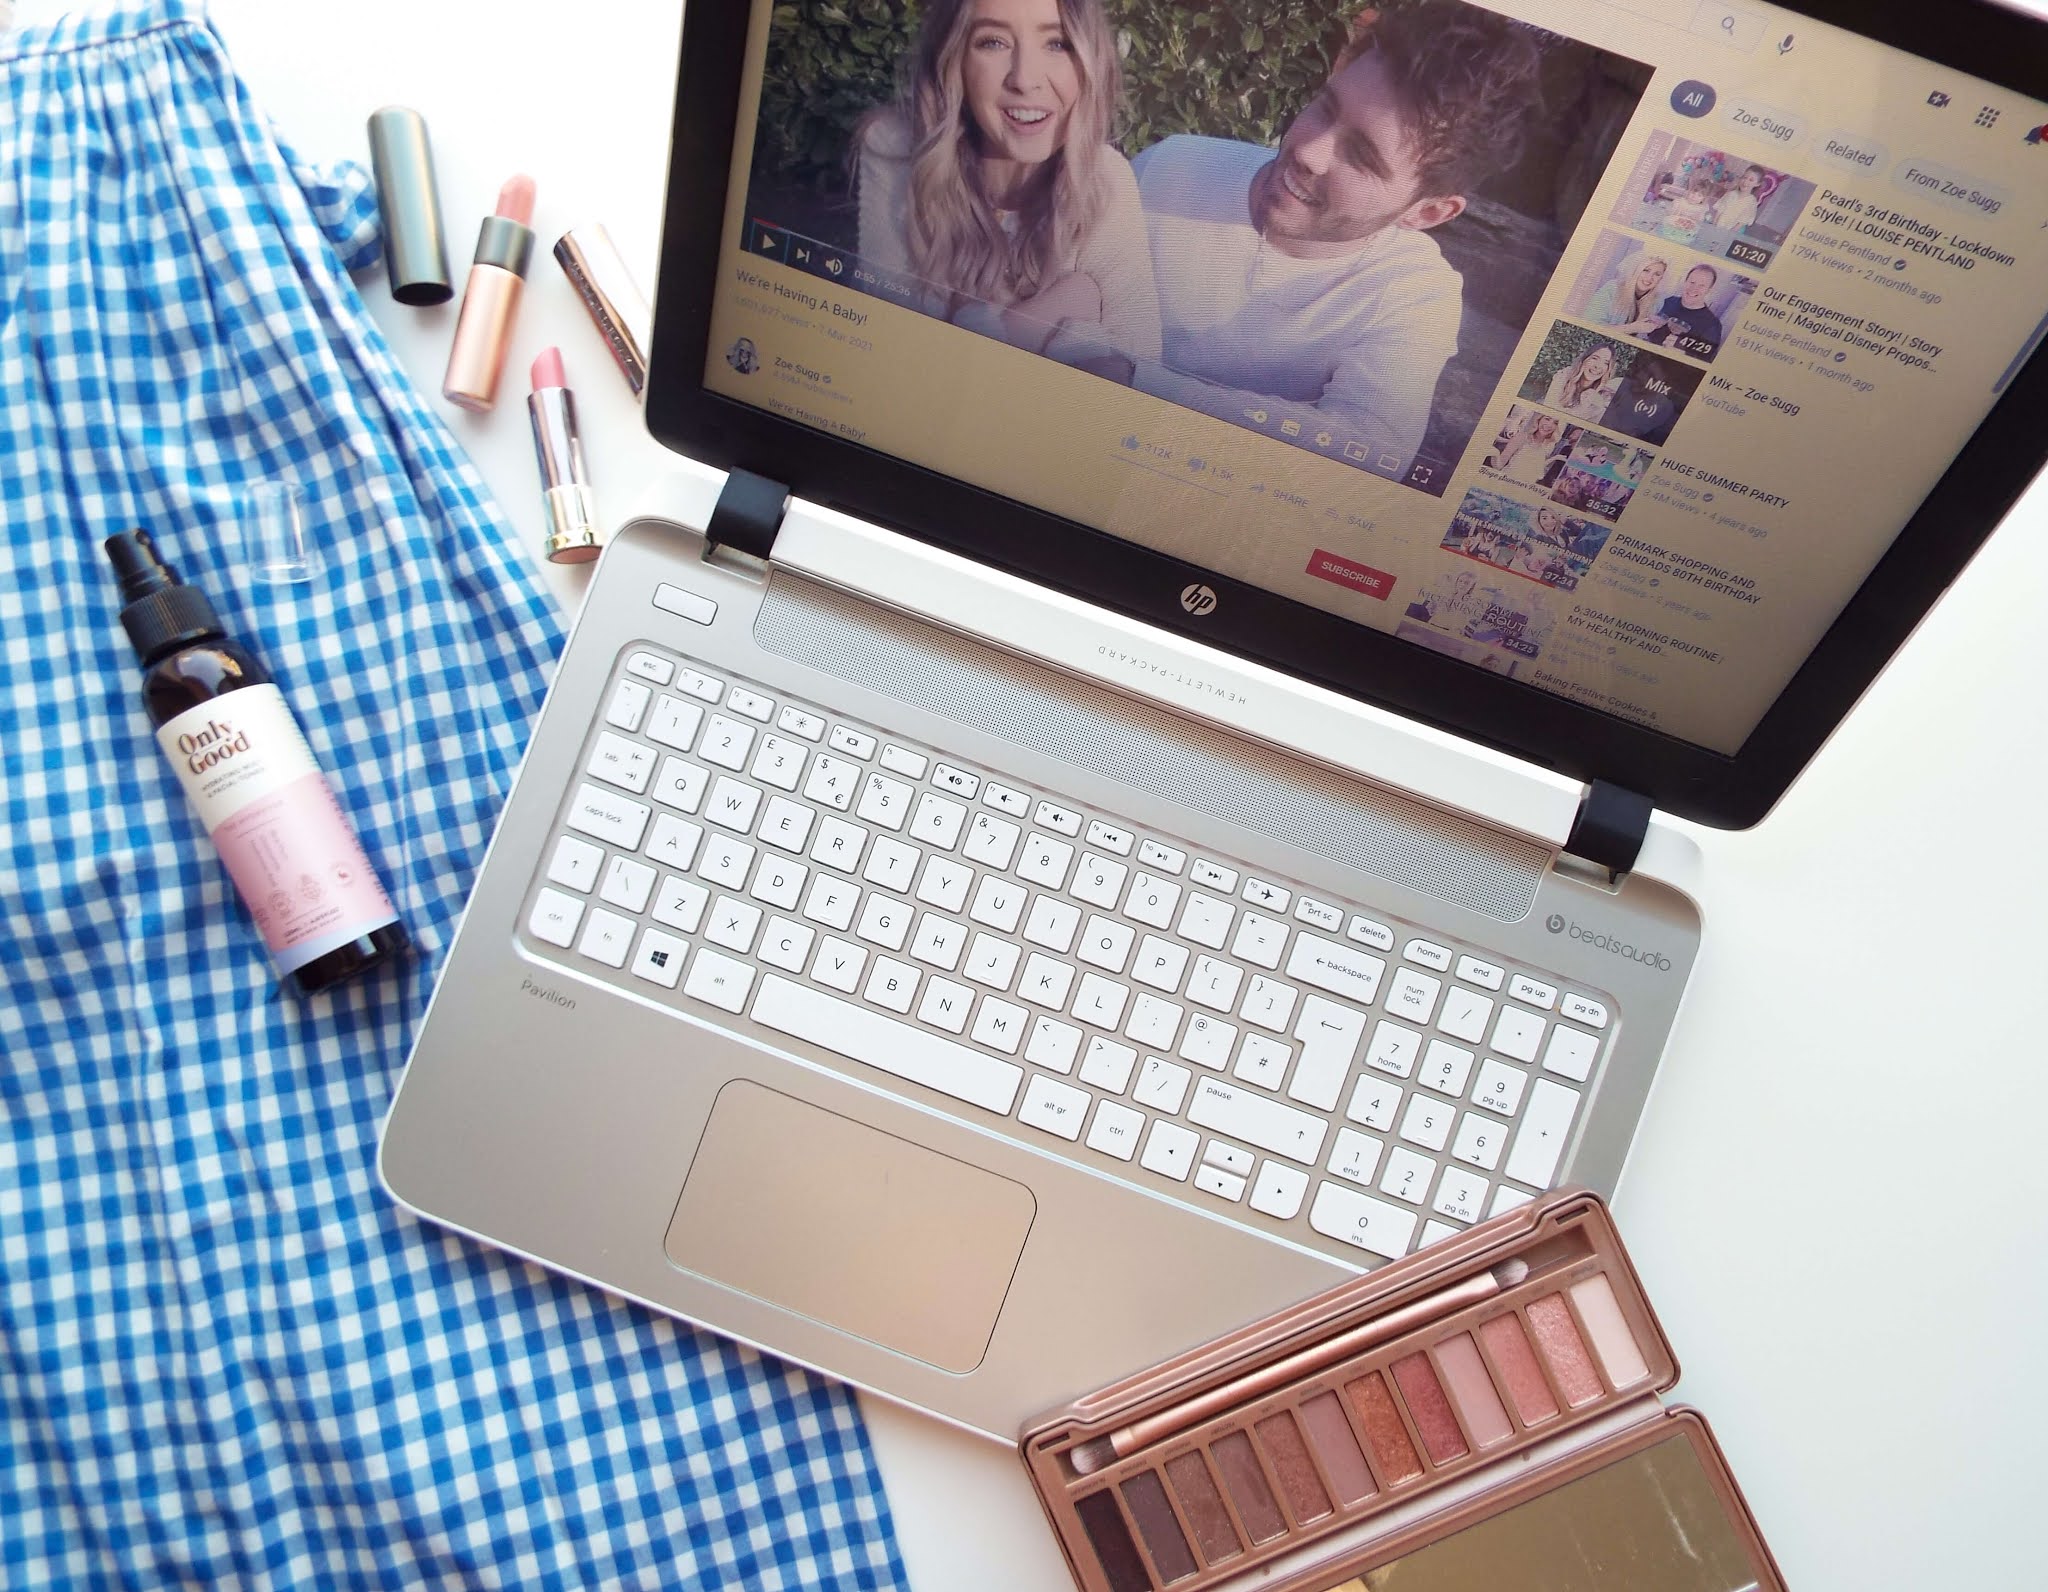 Flatlay of my March favourites, consisting of blue gingham dress diagonally to the left; skincare sat on top of the dress; my laptop centre, with Zoe Sugg's vlog displayed; some lipsticks to the top left area and eyeshadow palette to the bottom right.